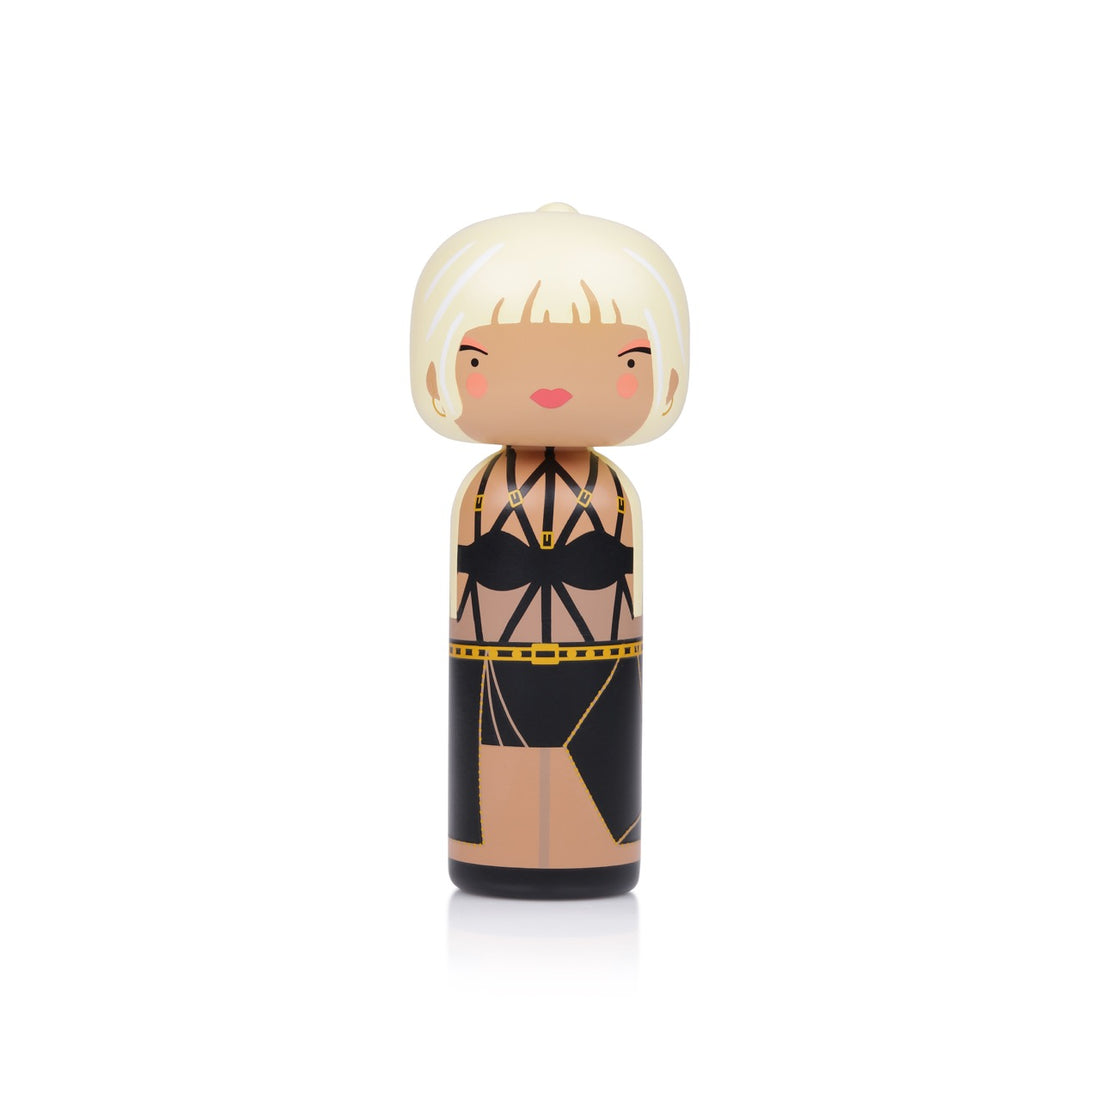 Kokeshi Doll by Sketch.Inc for Lucie Kaas - Donatella